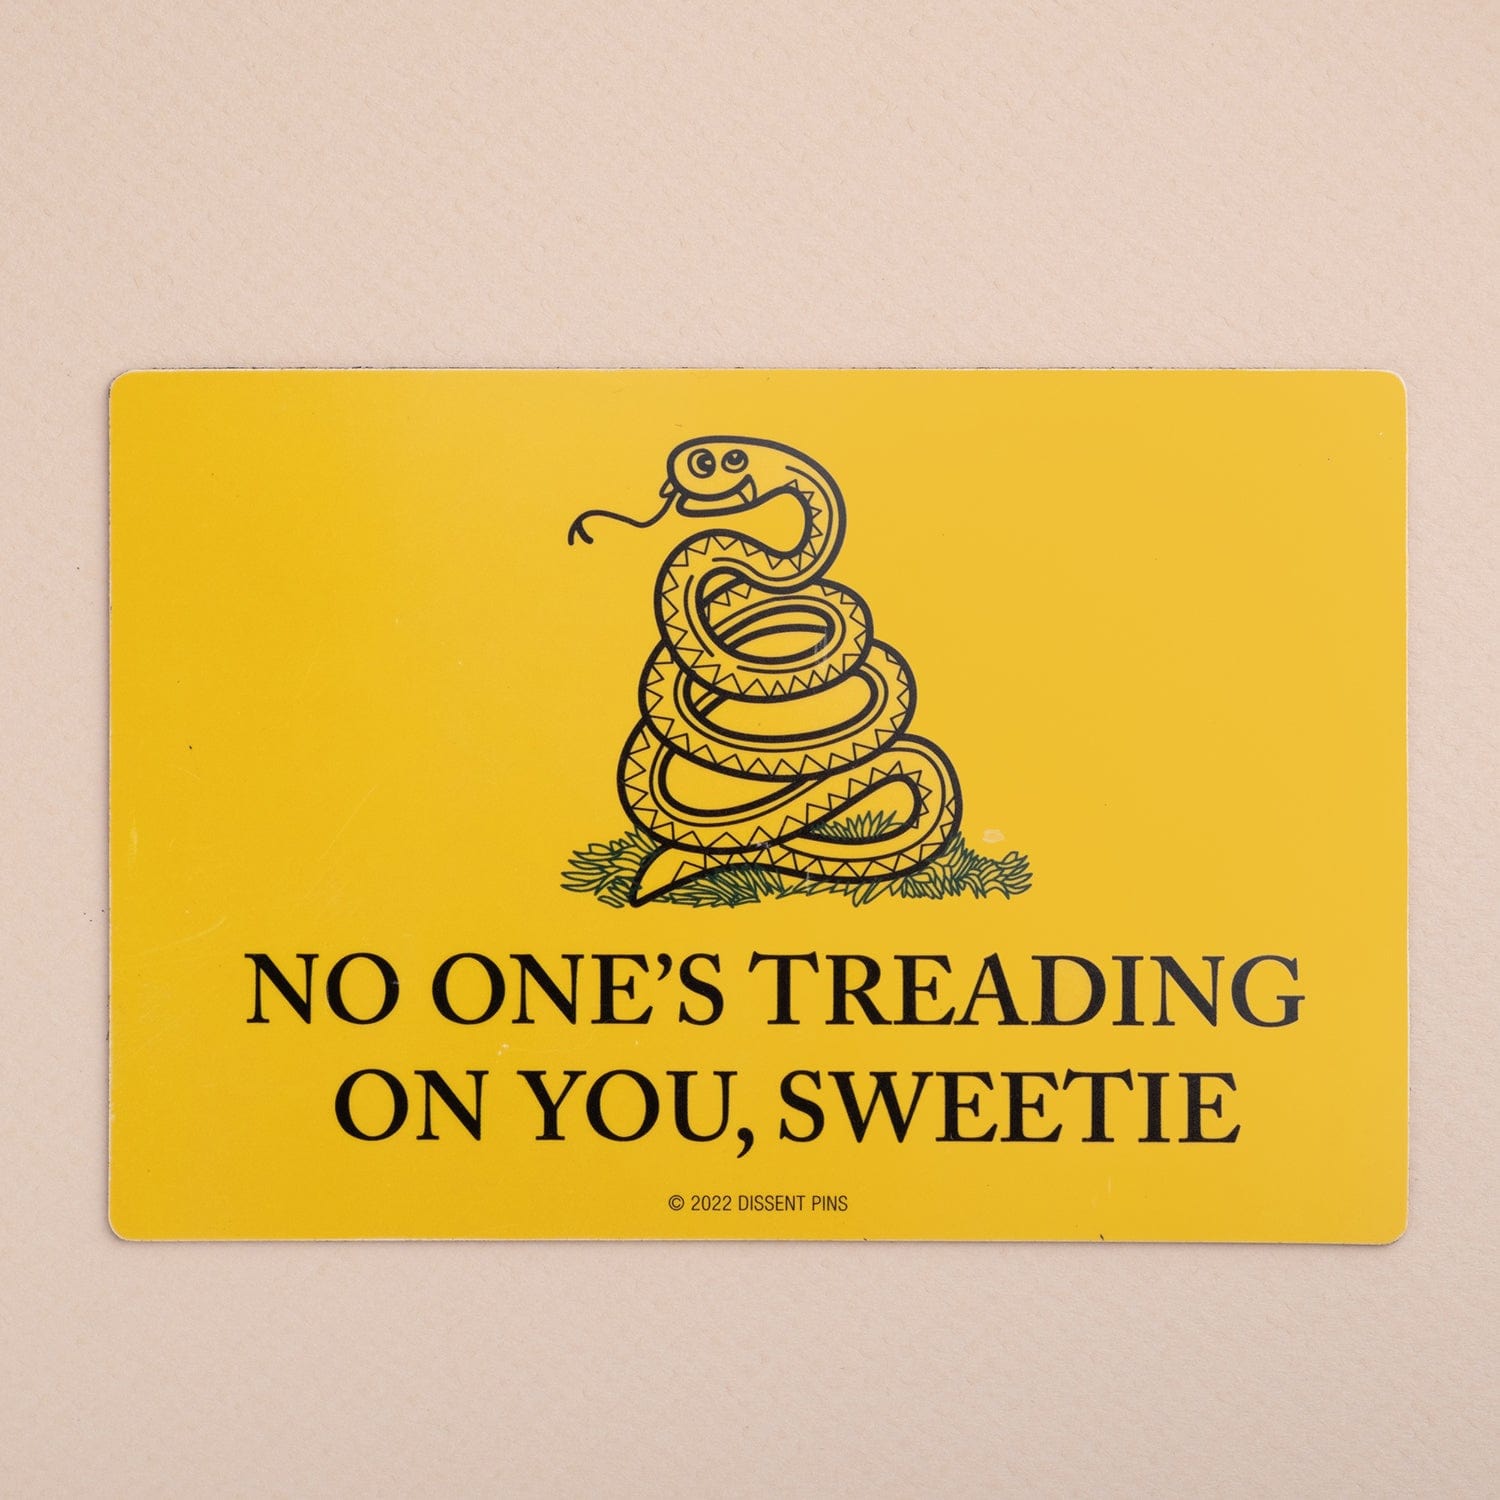 No One's Treading On You, Sweetie - Car Magnet